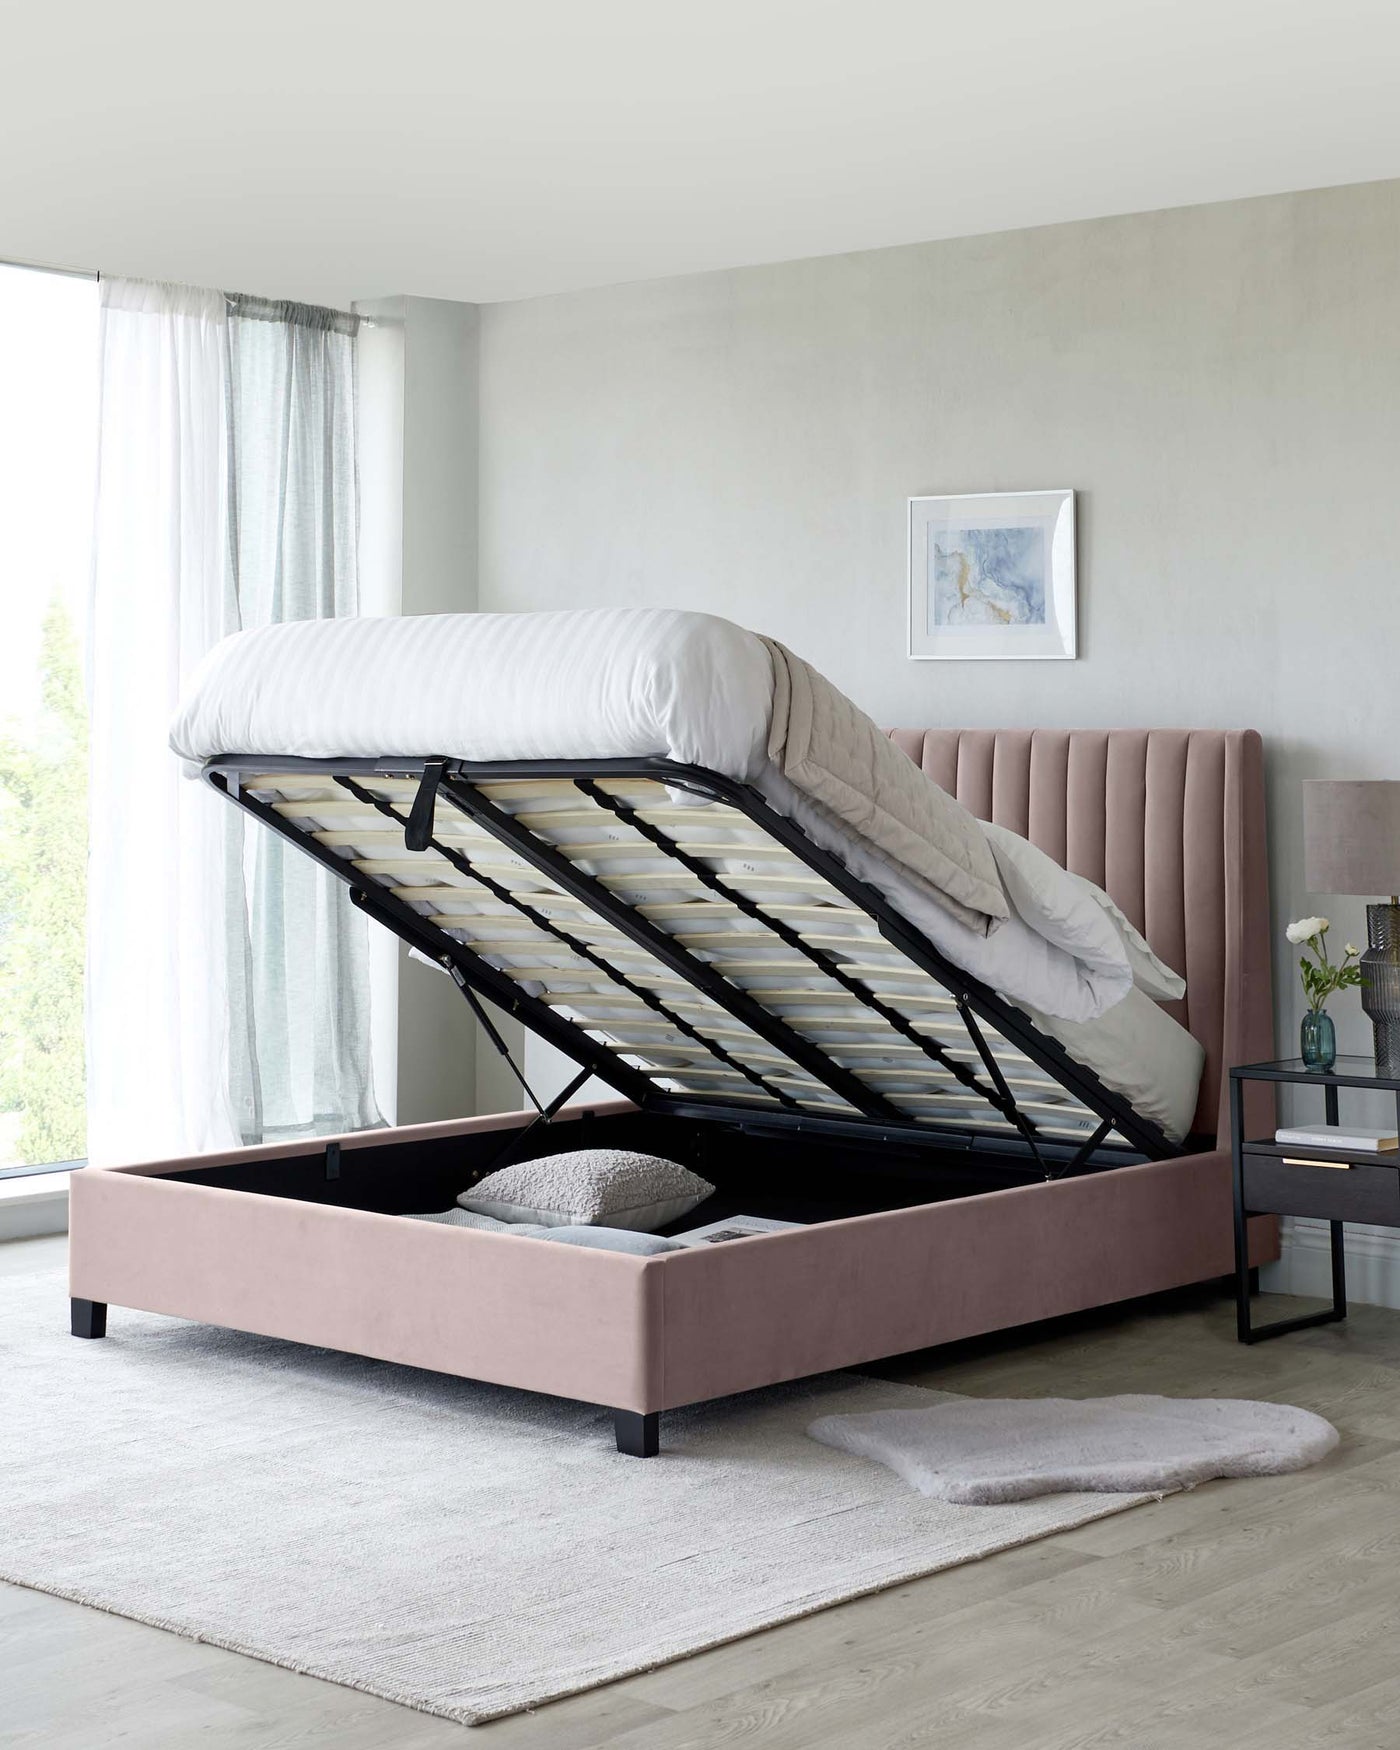 Upholstered storage bed with lifted mattress frame revealing under-bed storage space, featuring a plush, channel-tufted headboard in a soft blush colour, accented with dark wooden legs, set against a neutral bedroom decor.